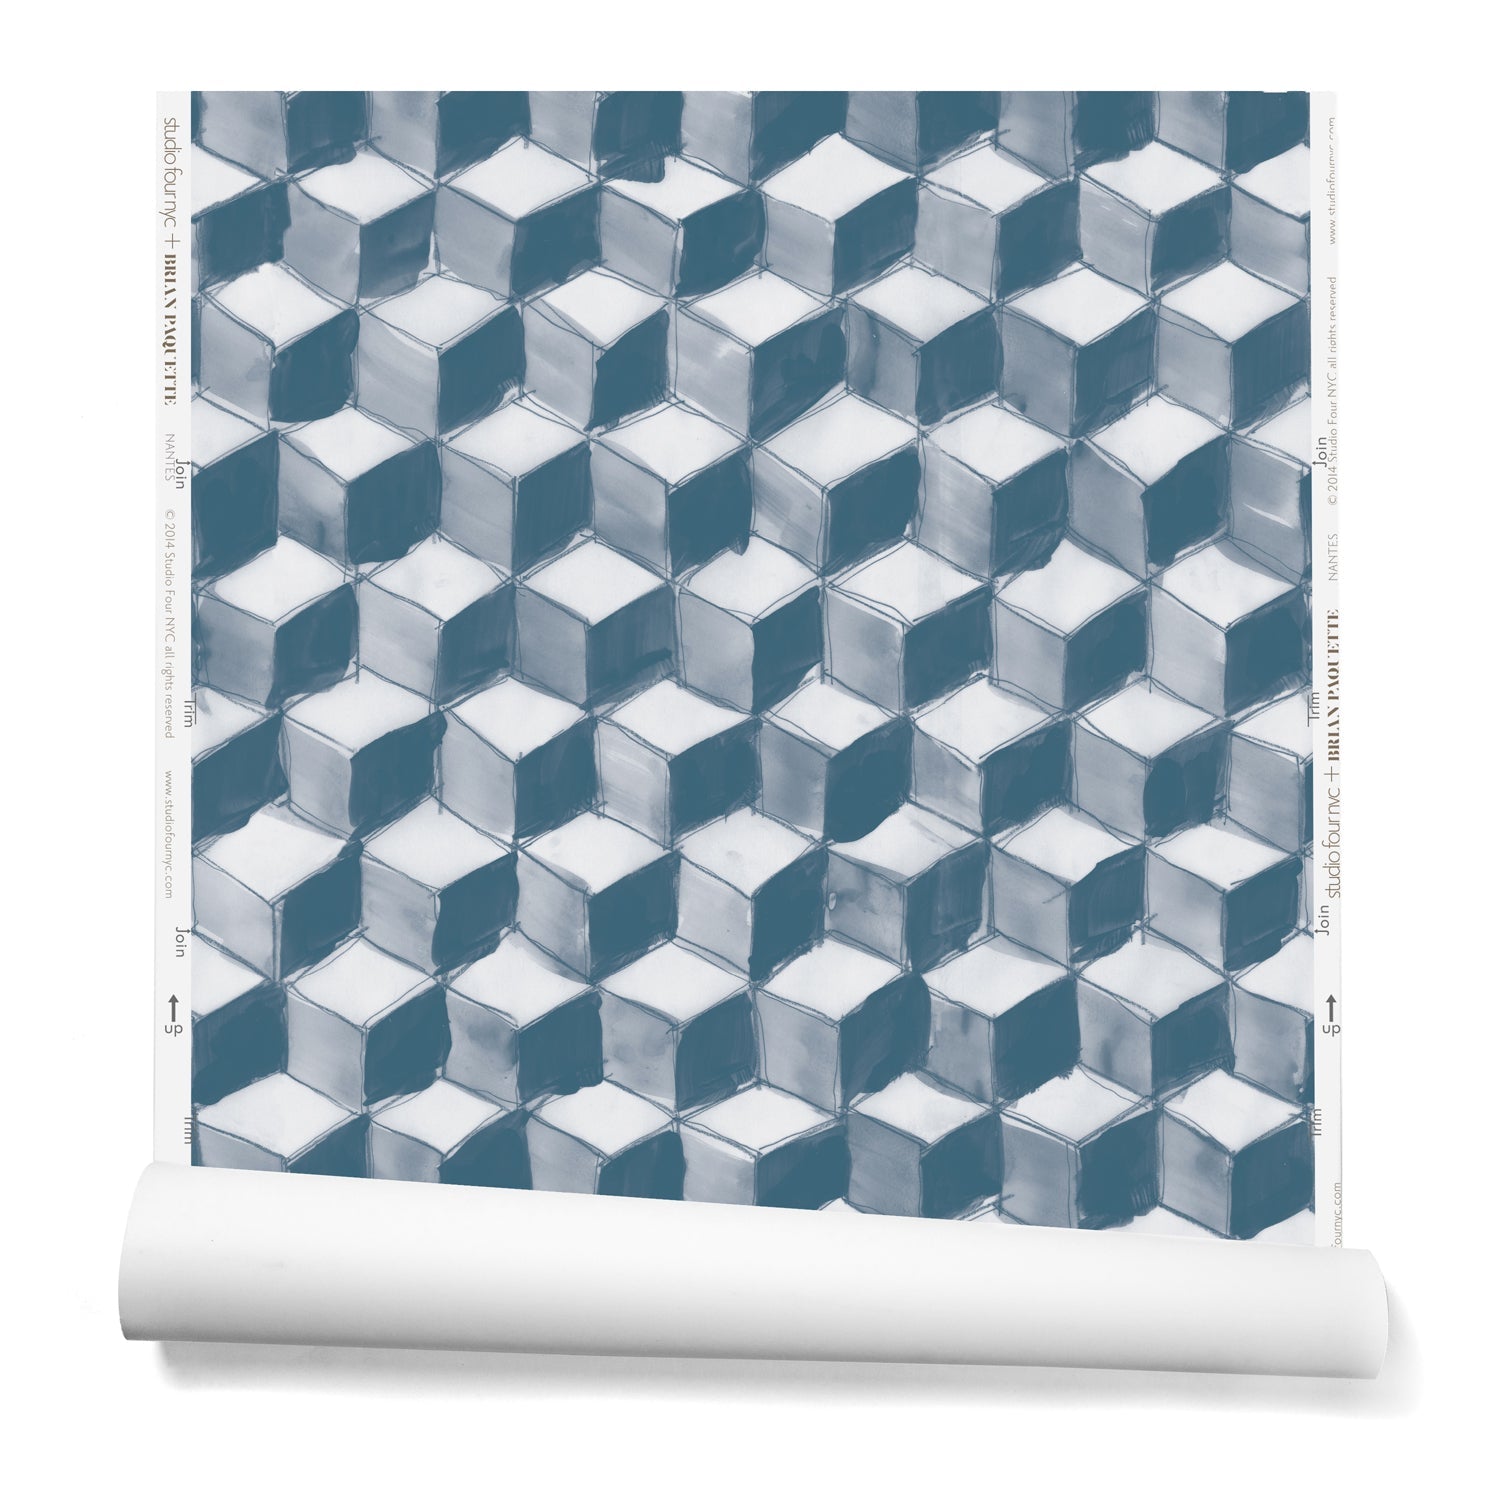 Partially unrolled wallpaper in a hand-painted tumbling block pattern in shades of blue on a white background.